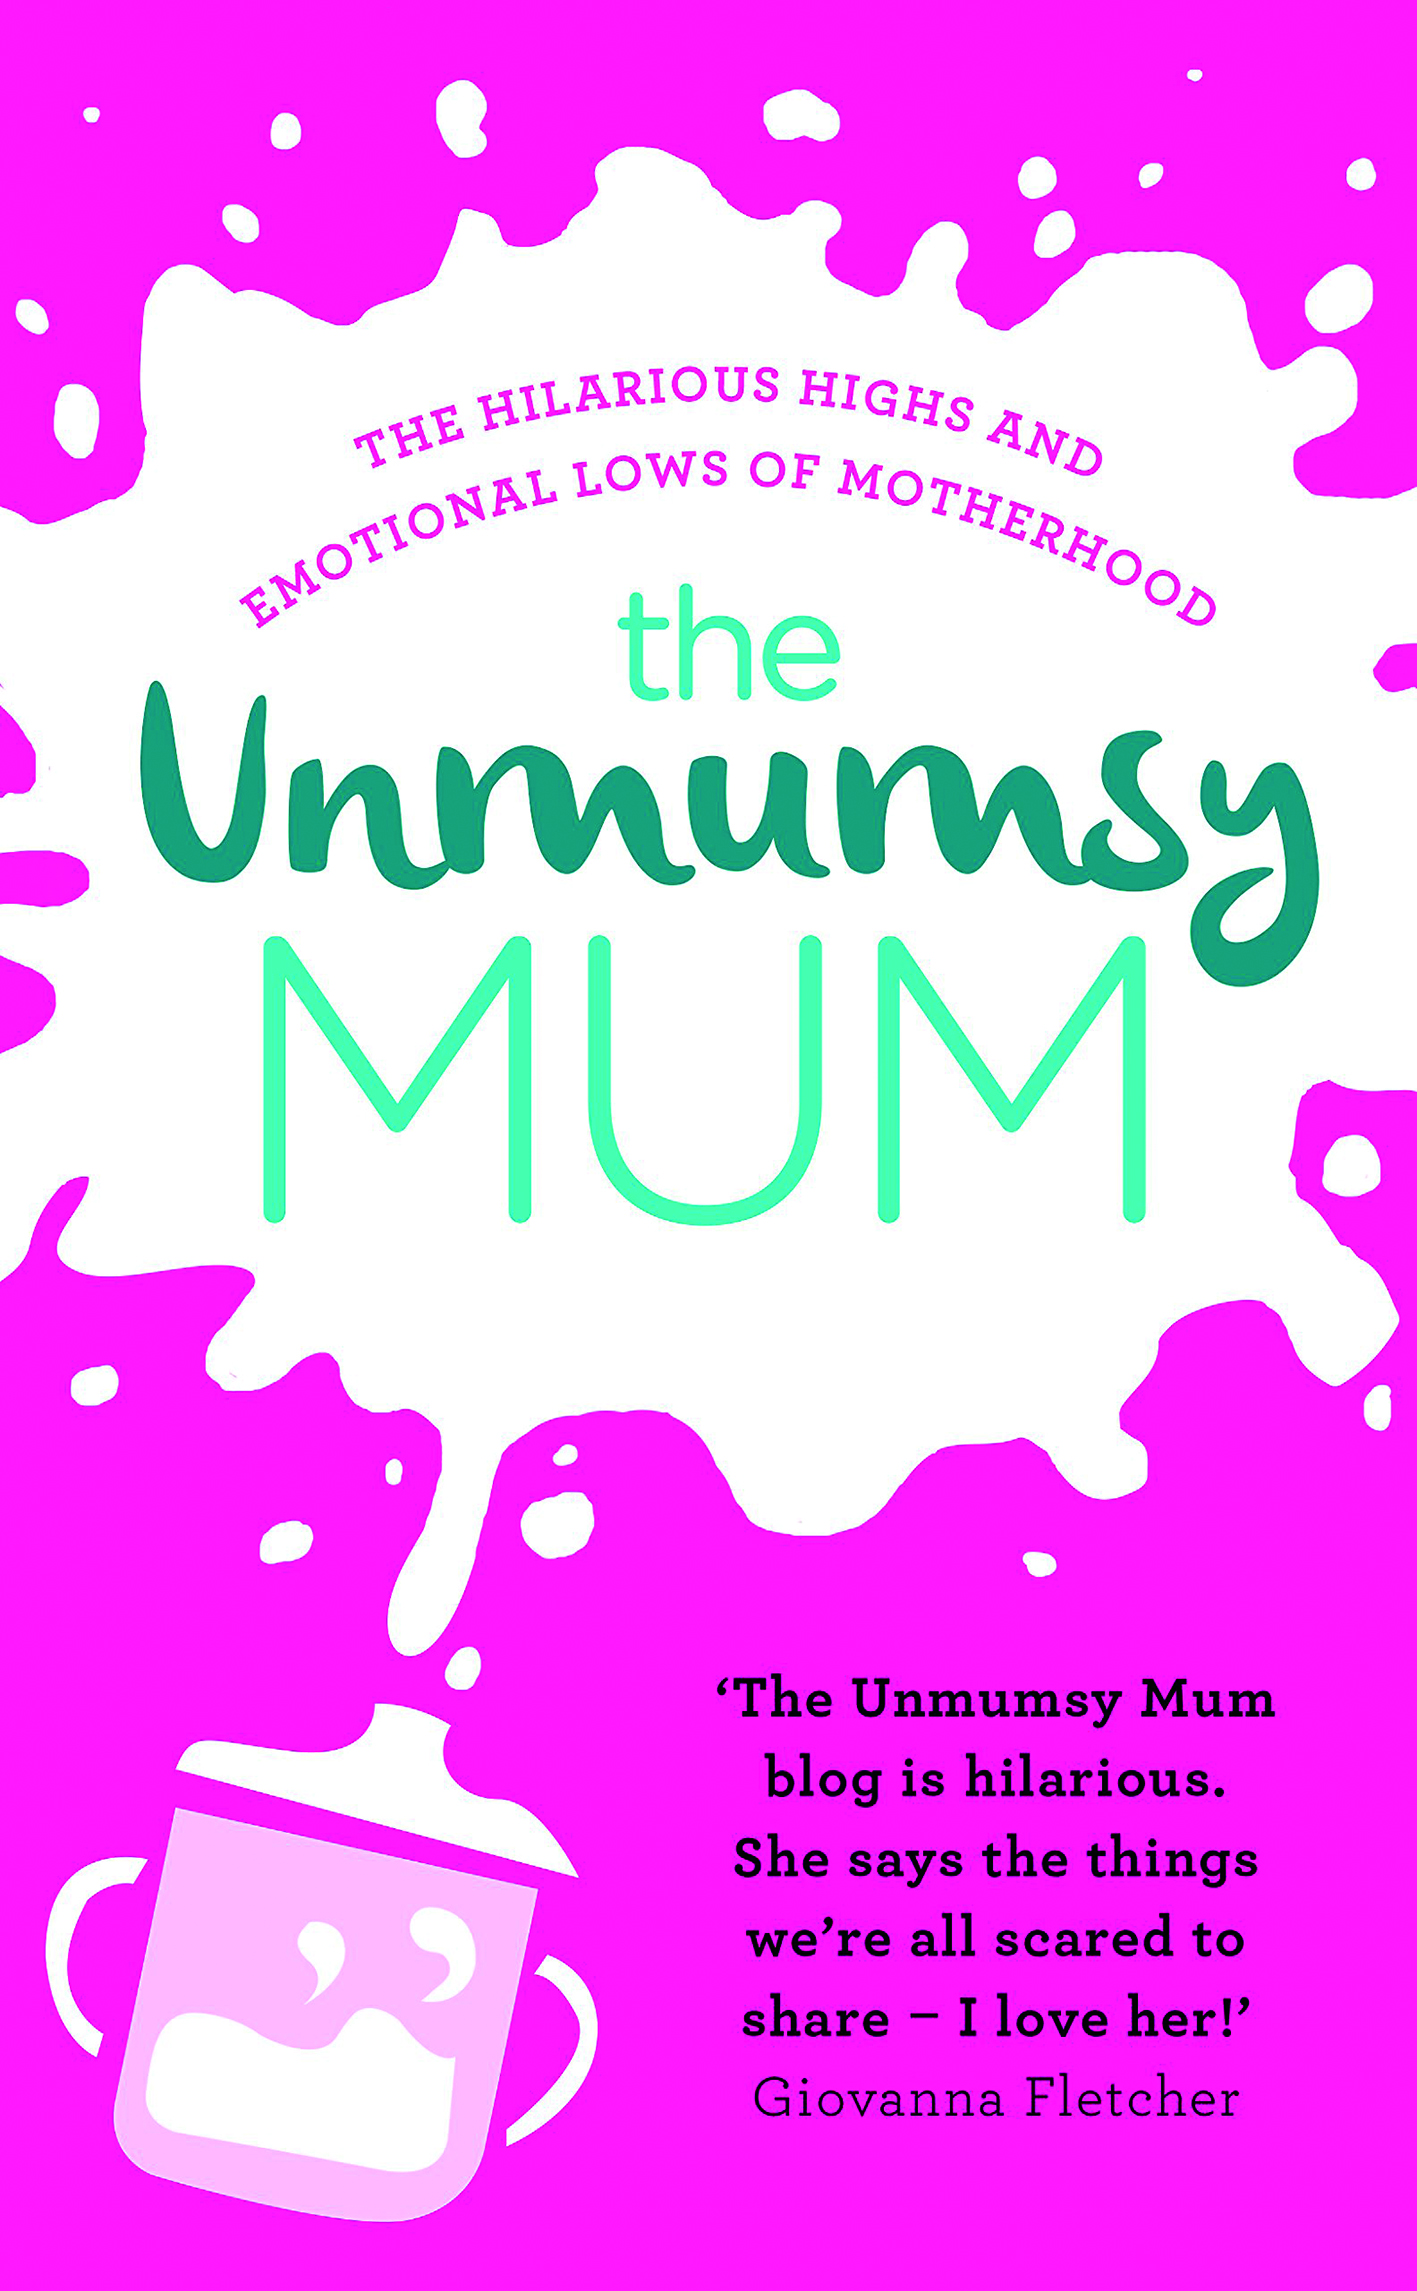 Books make the perfect Mother’s Day Gift